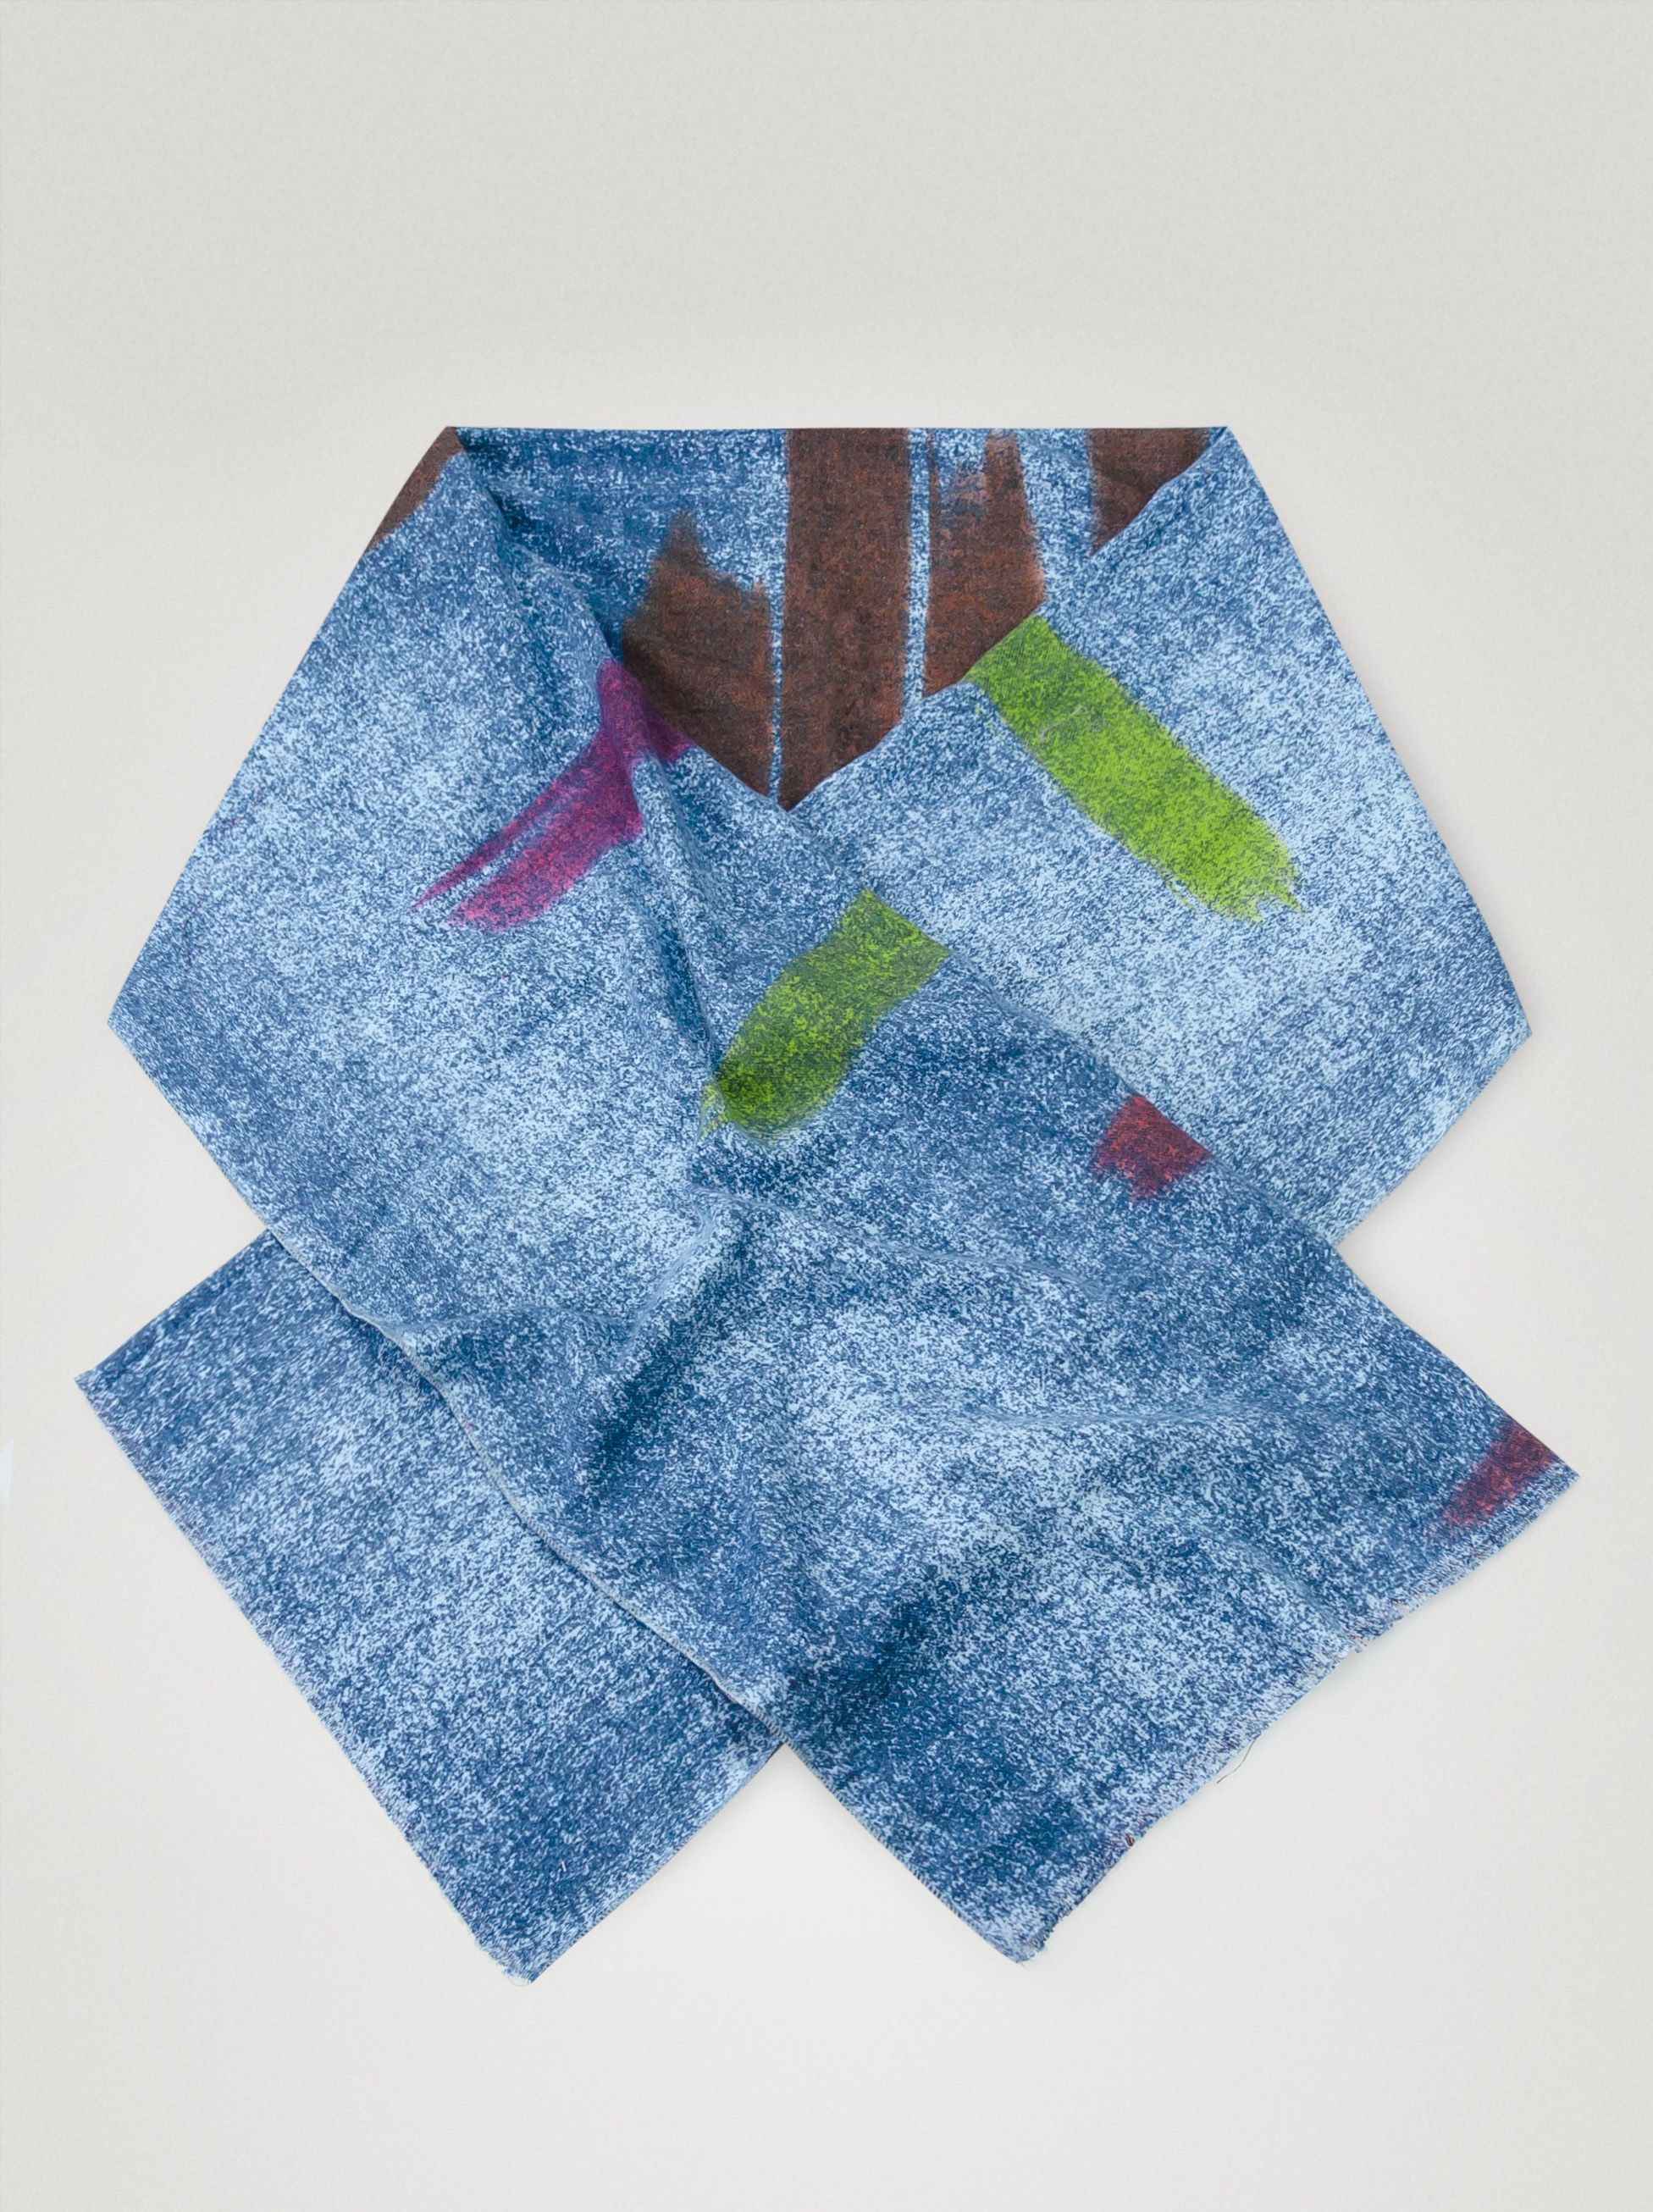 Scarf with pattern - Allora image 1